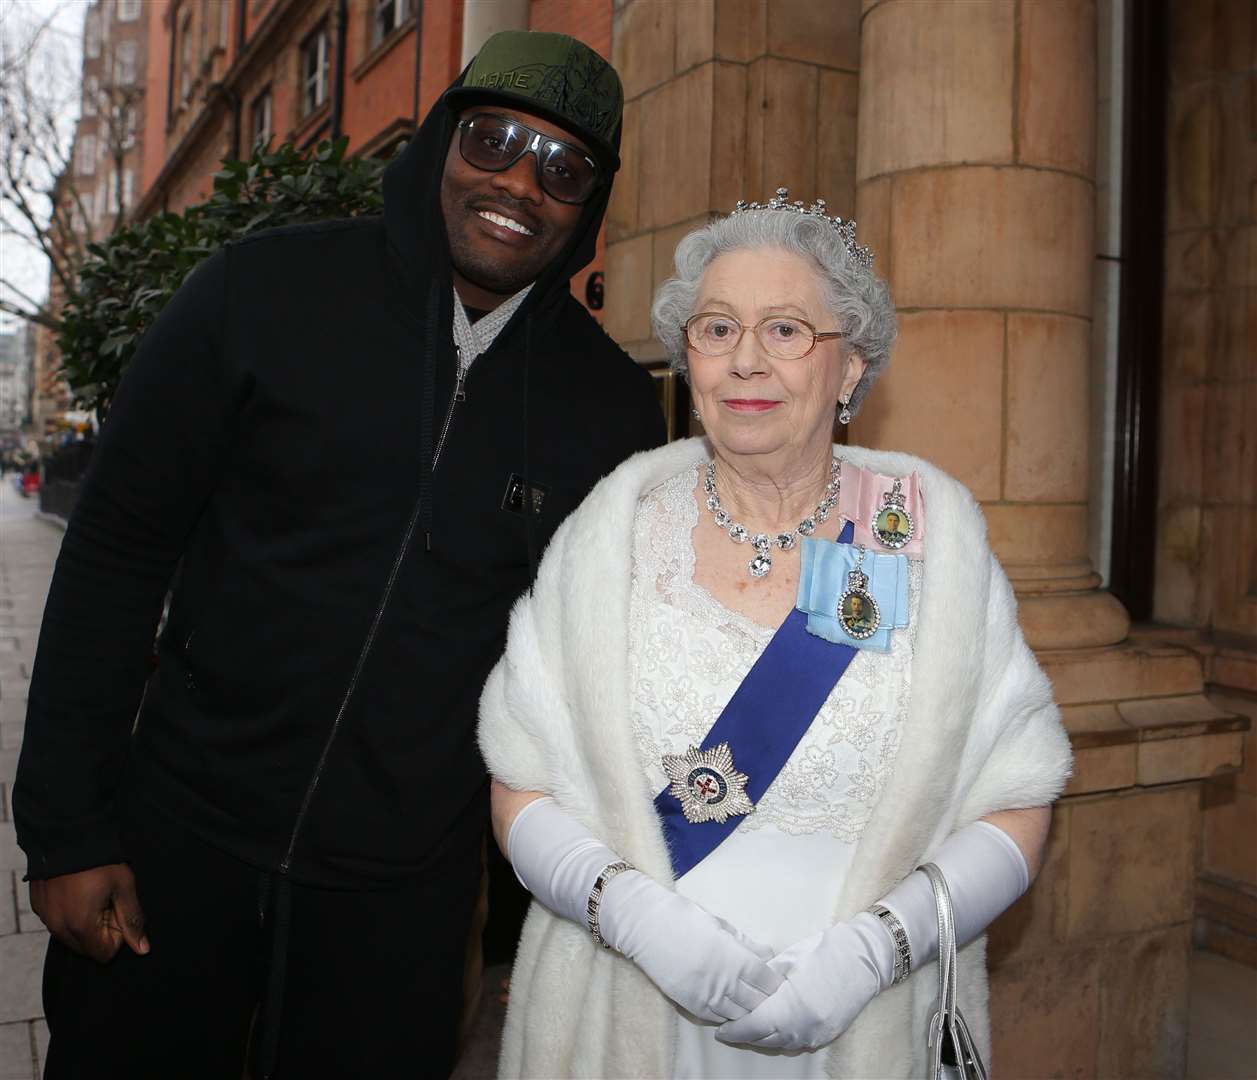 Queen Elizabeth look-alike Mary Reynolds poses with boxer Dereck Chisora. Ms Reynolds described the late monarch as ‘well-loved’ and someone who had ‘so much light’ (Nick Potts/PA)